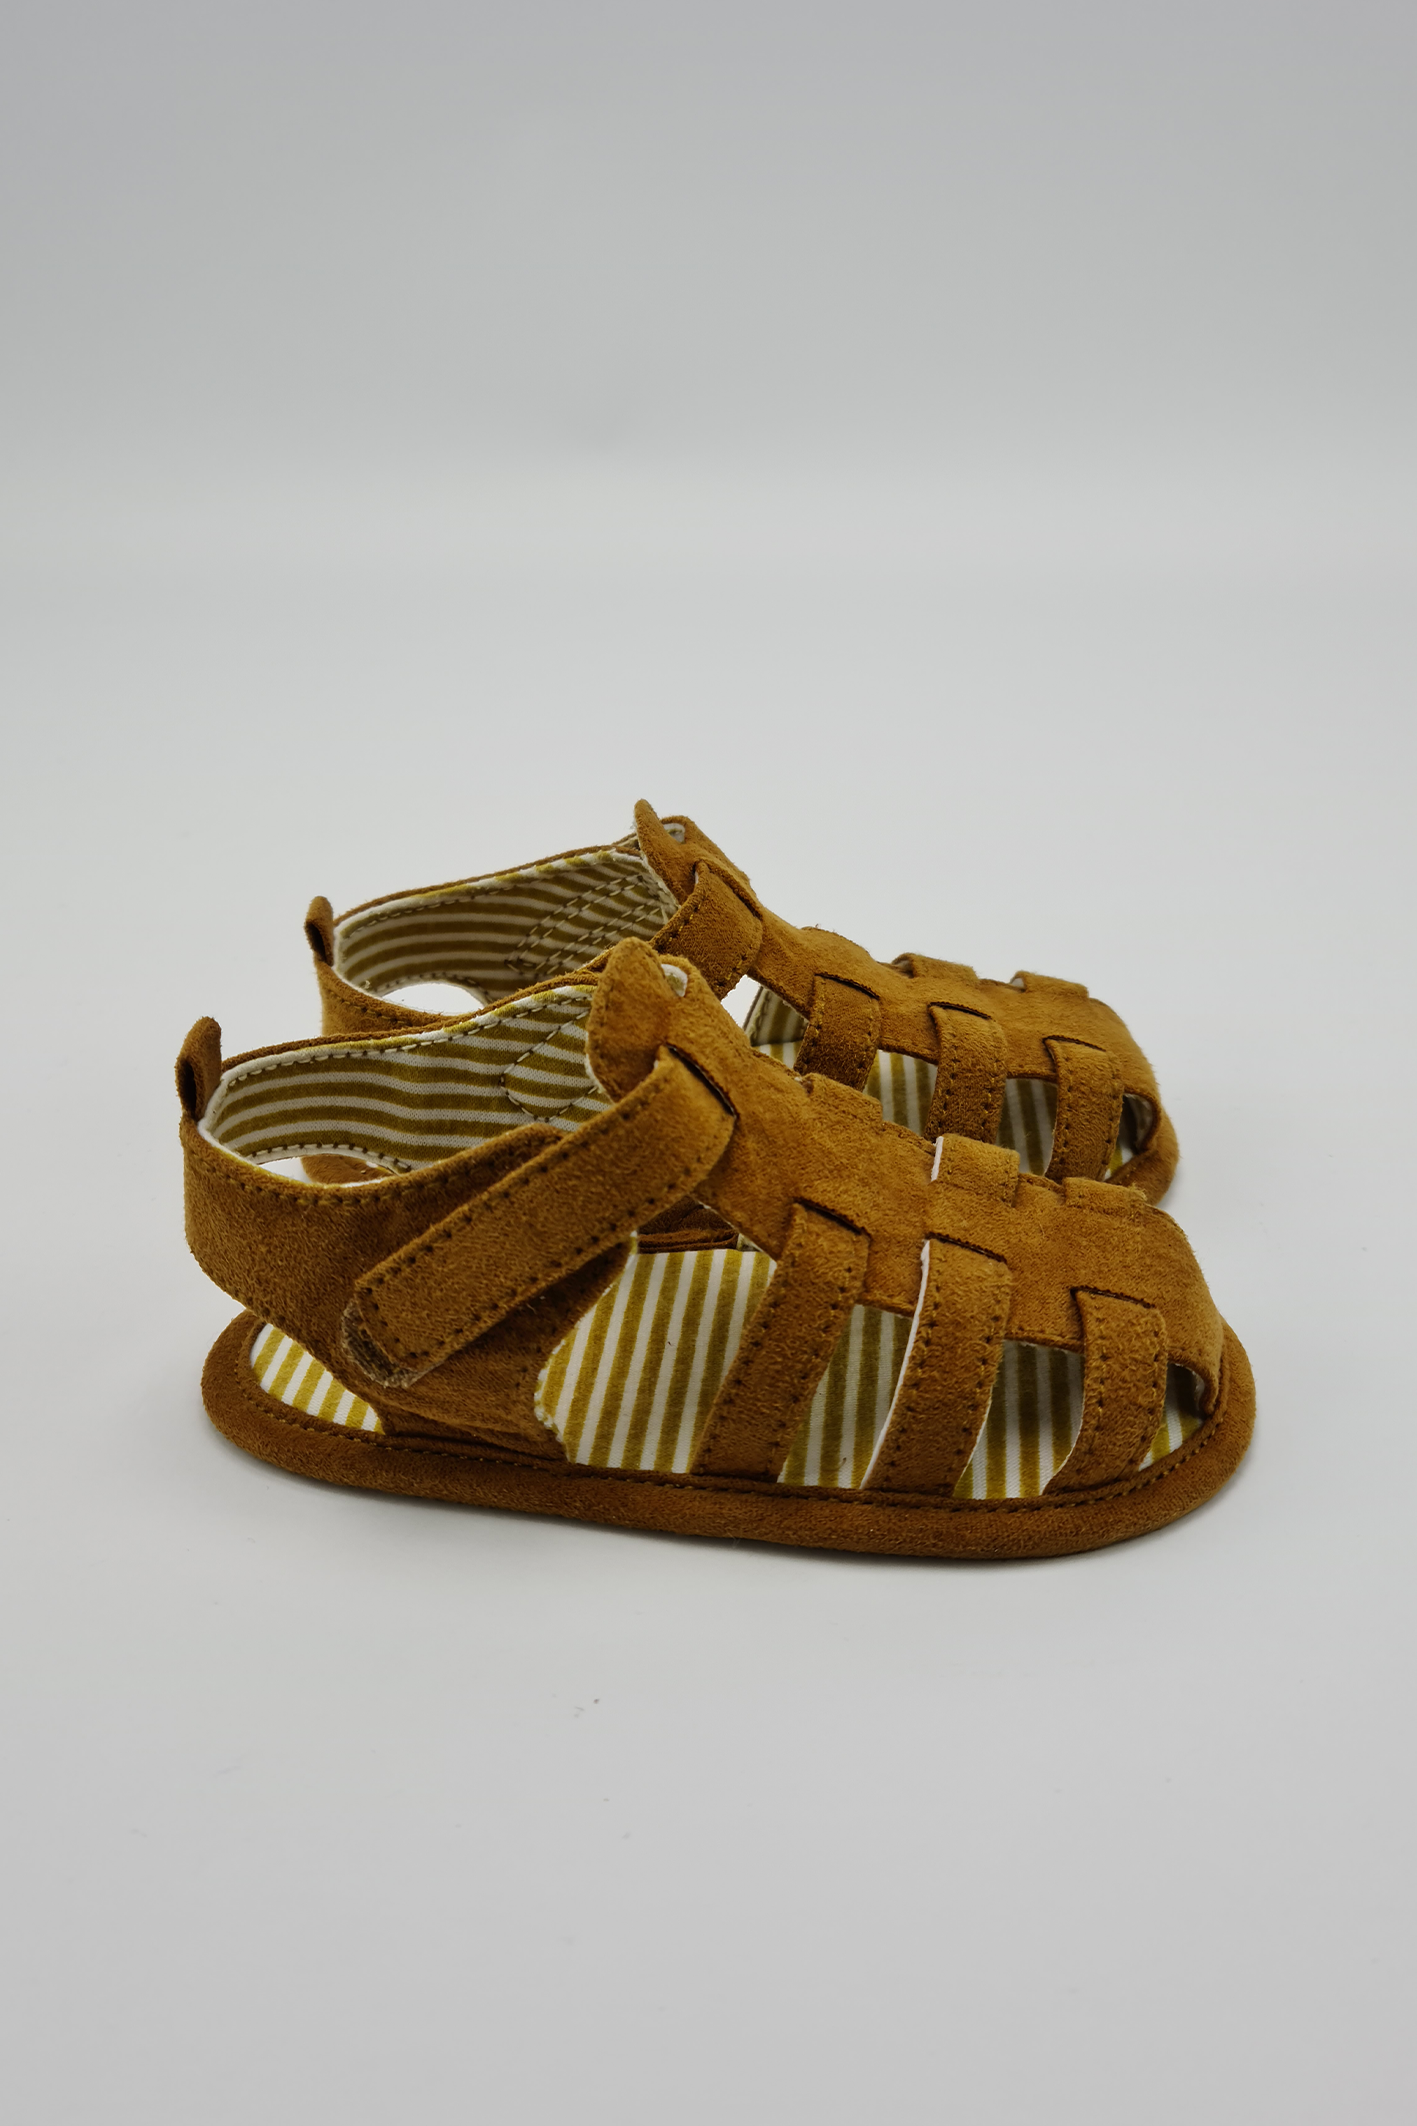 12-18m (Taille 3) - Sandales